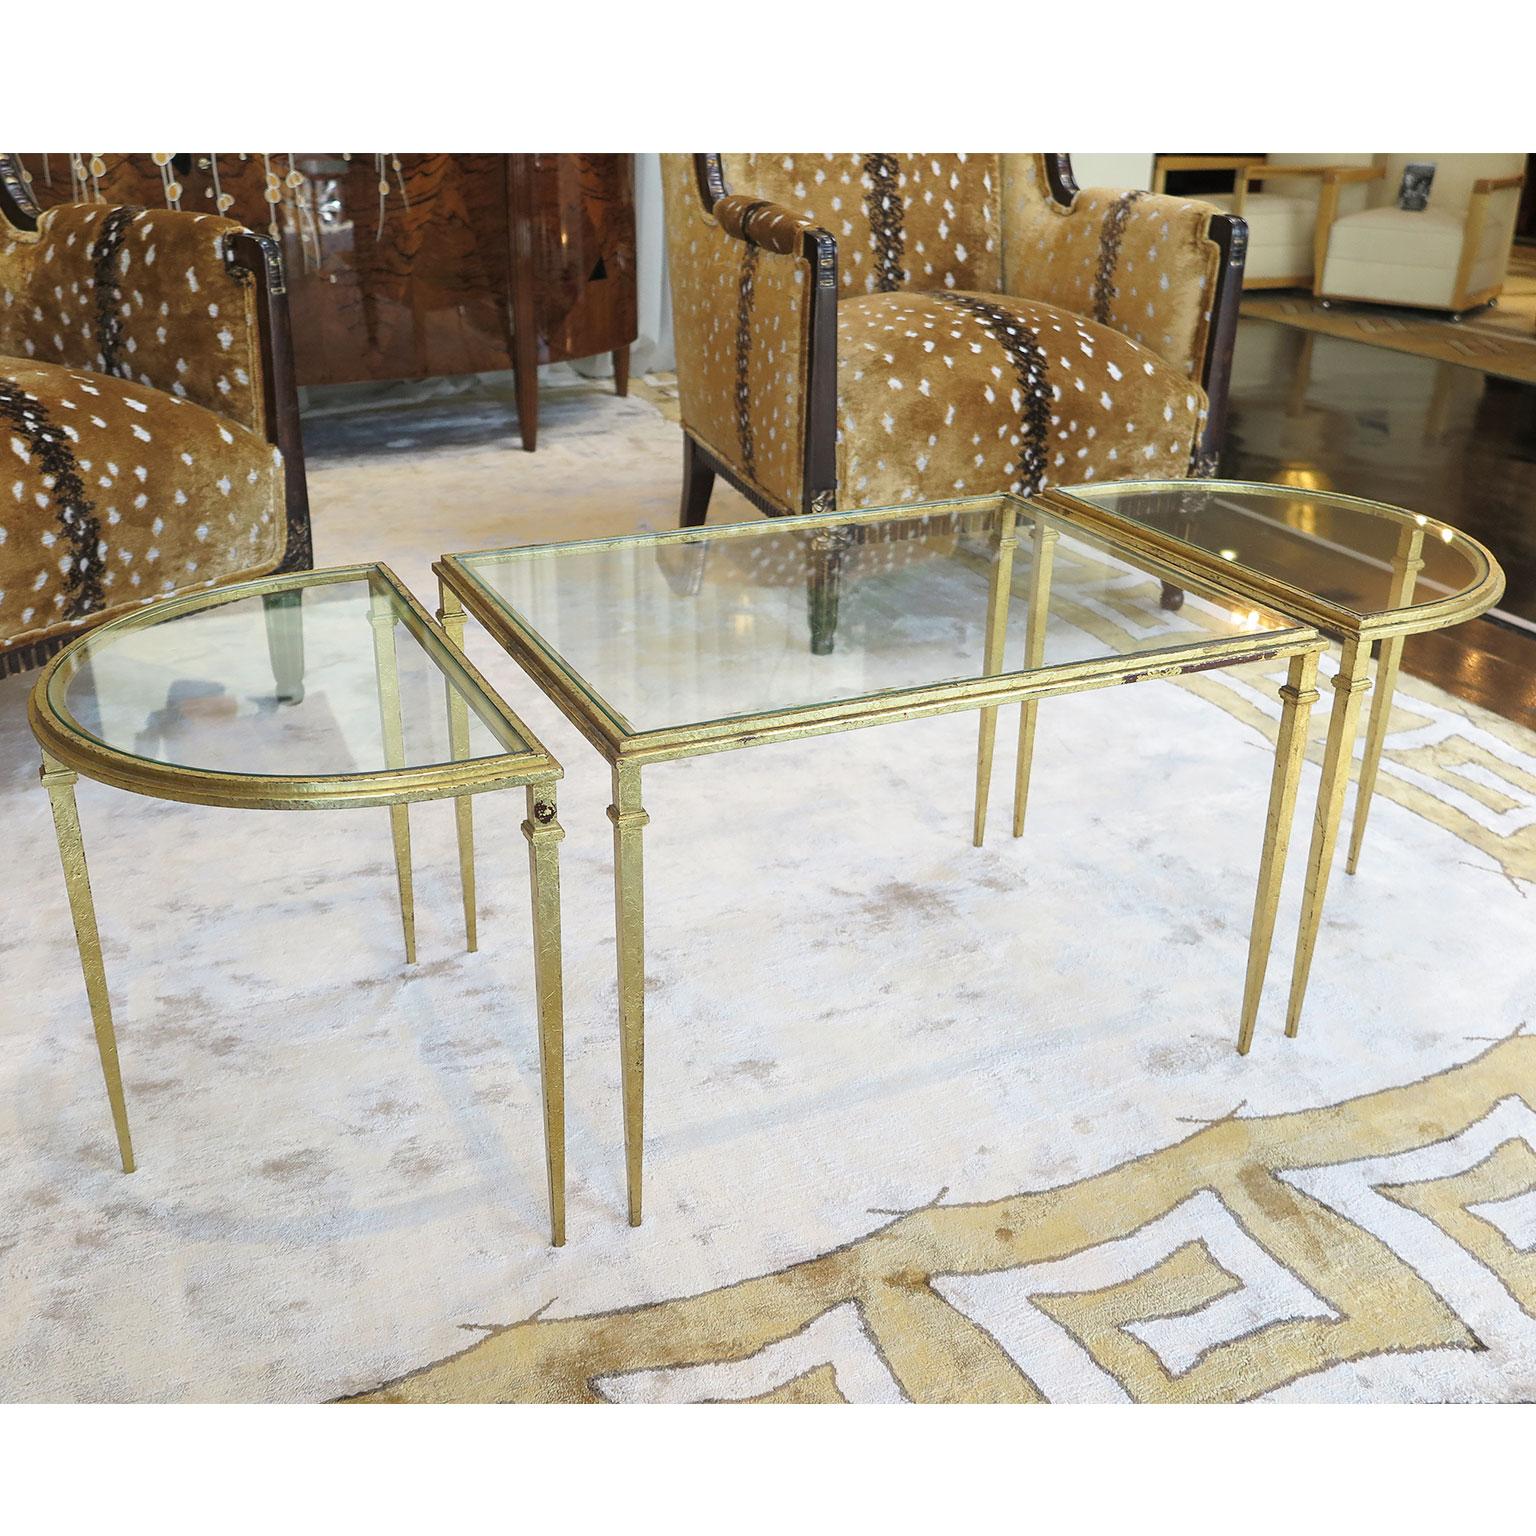 French Three-Piece Glass Coffee Table in Gold Leaf with Demilune Sides